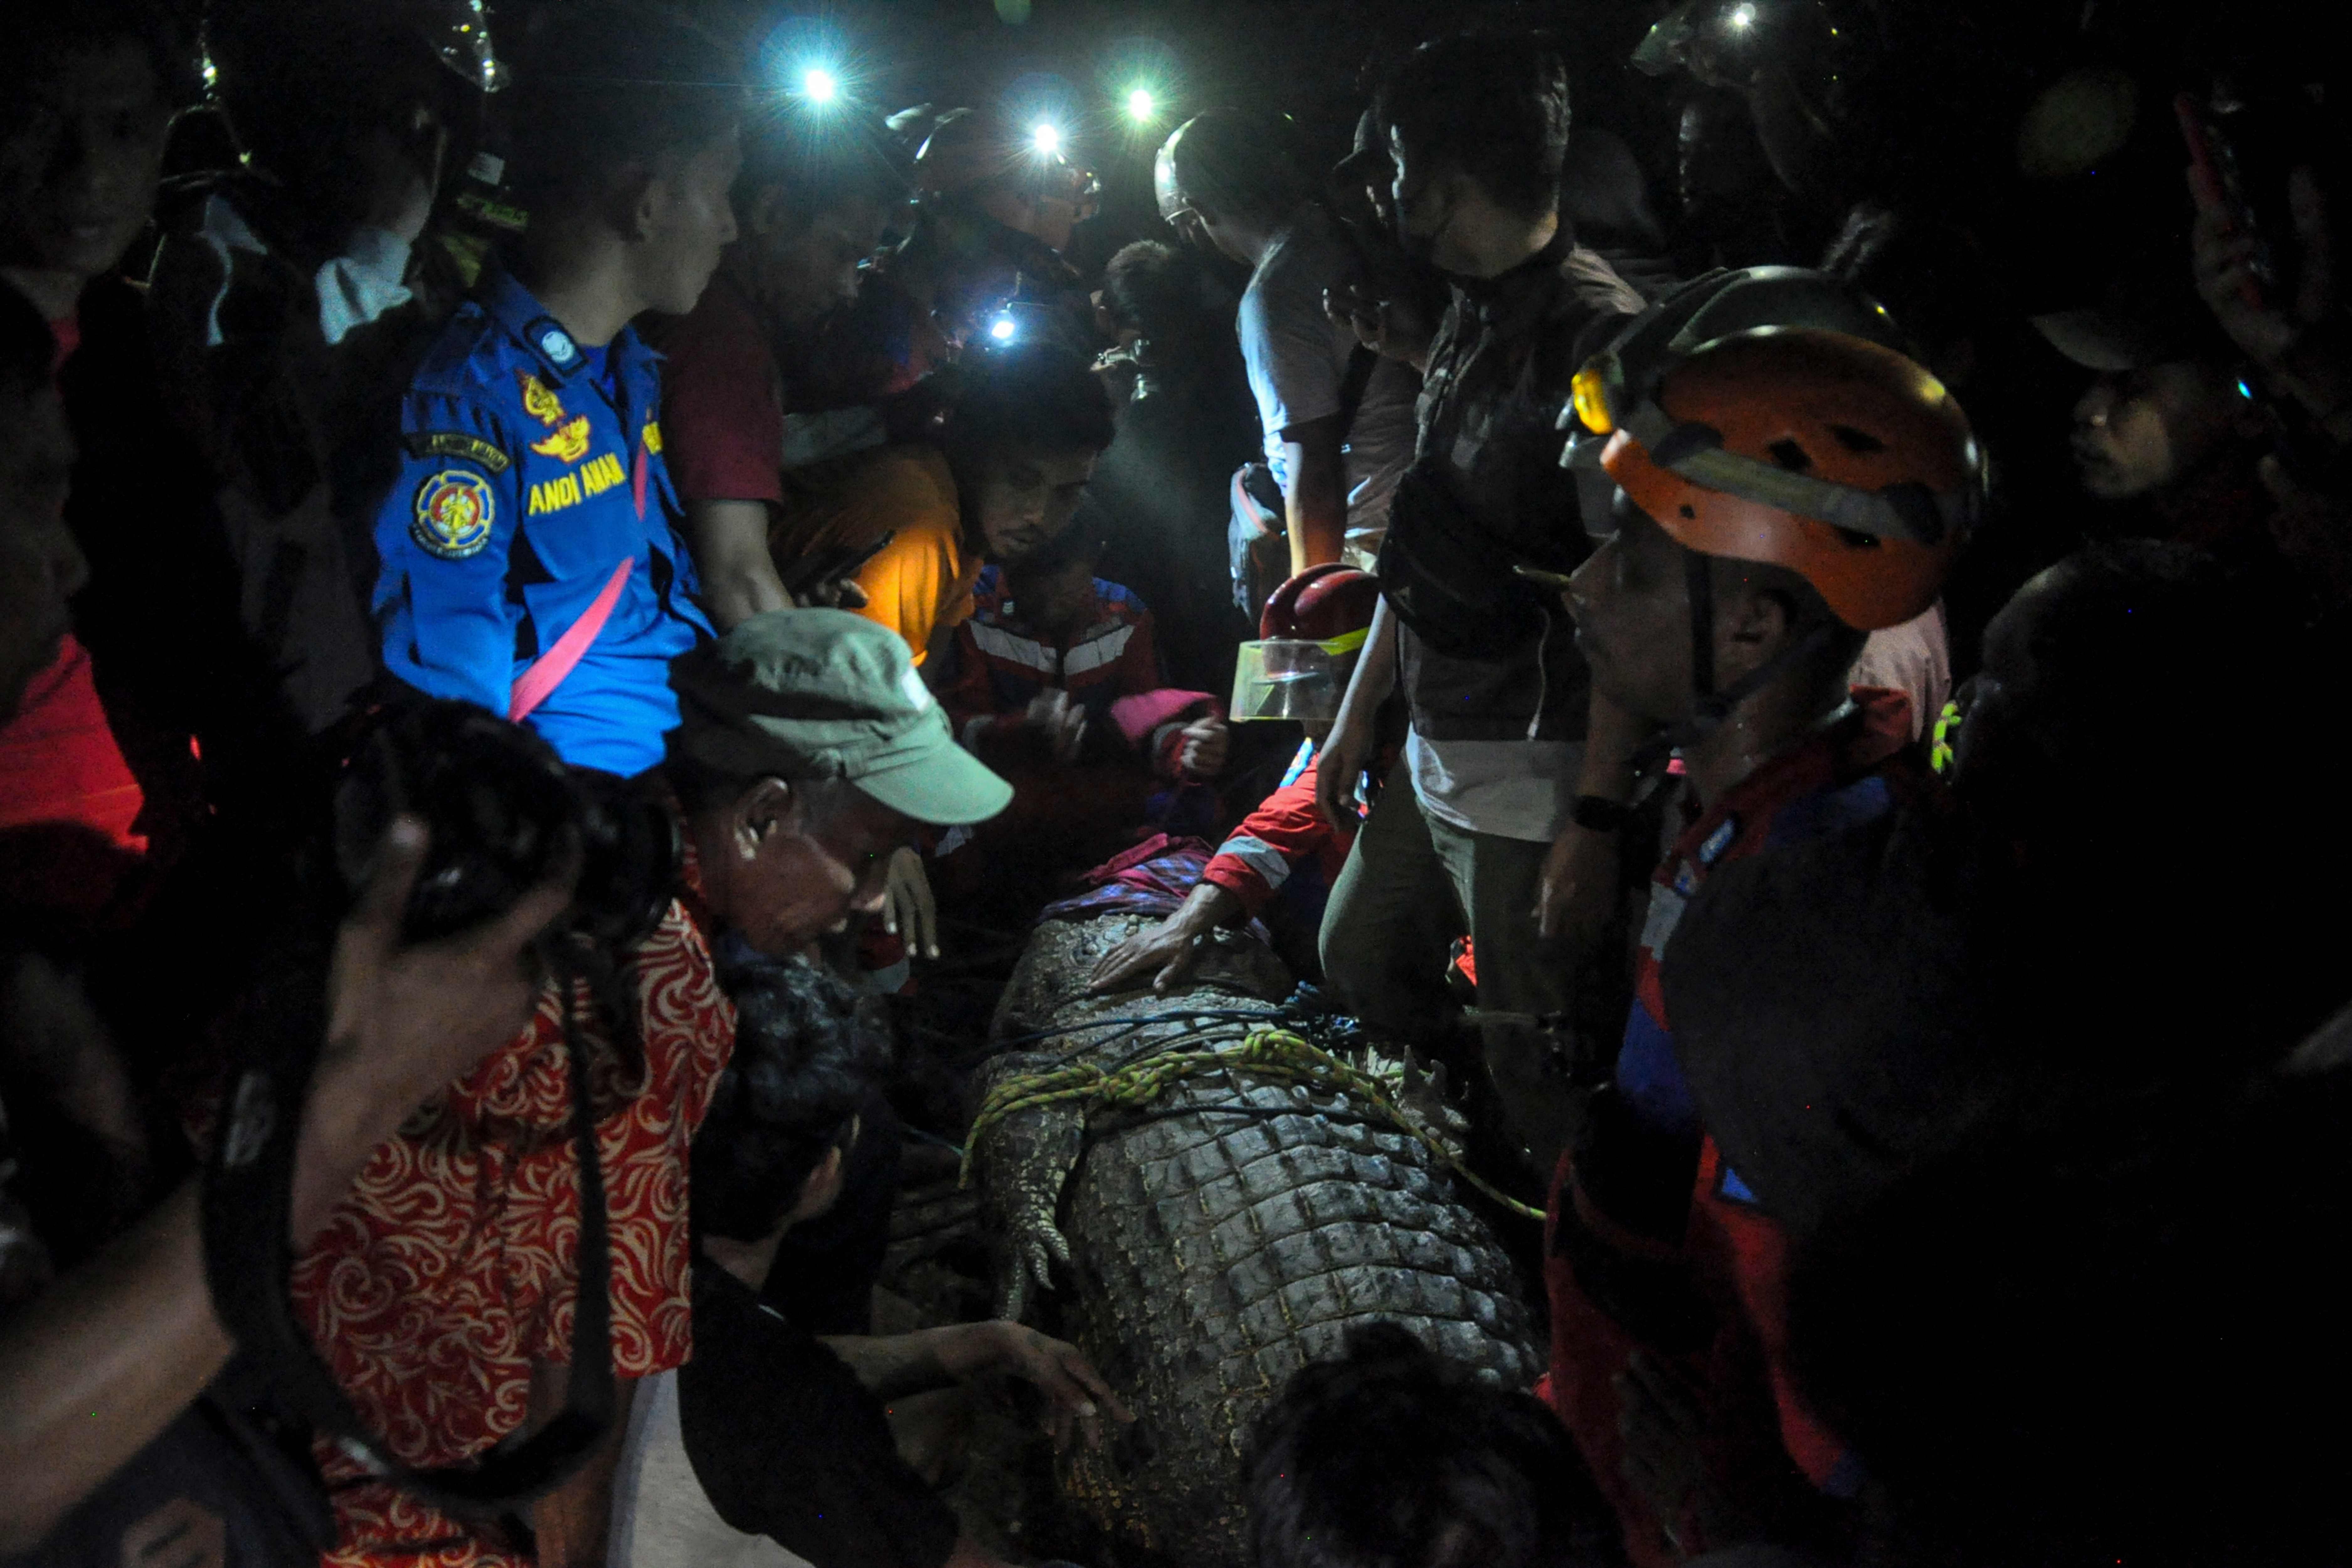 Dozens of residents were involved in the operation after the crocodile was brought on land